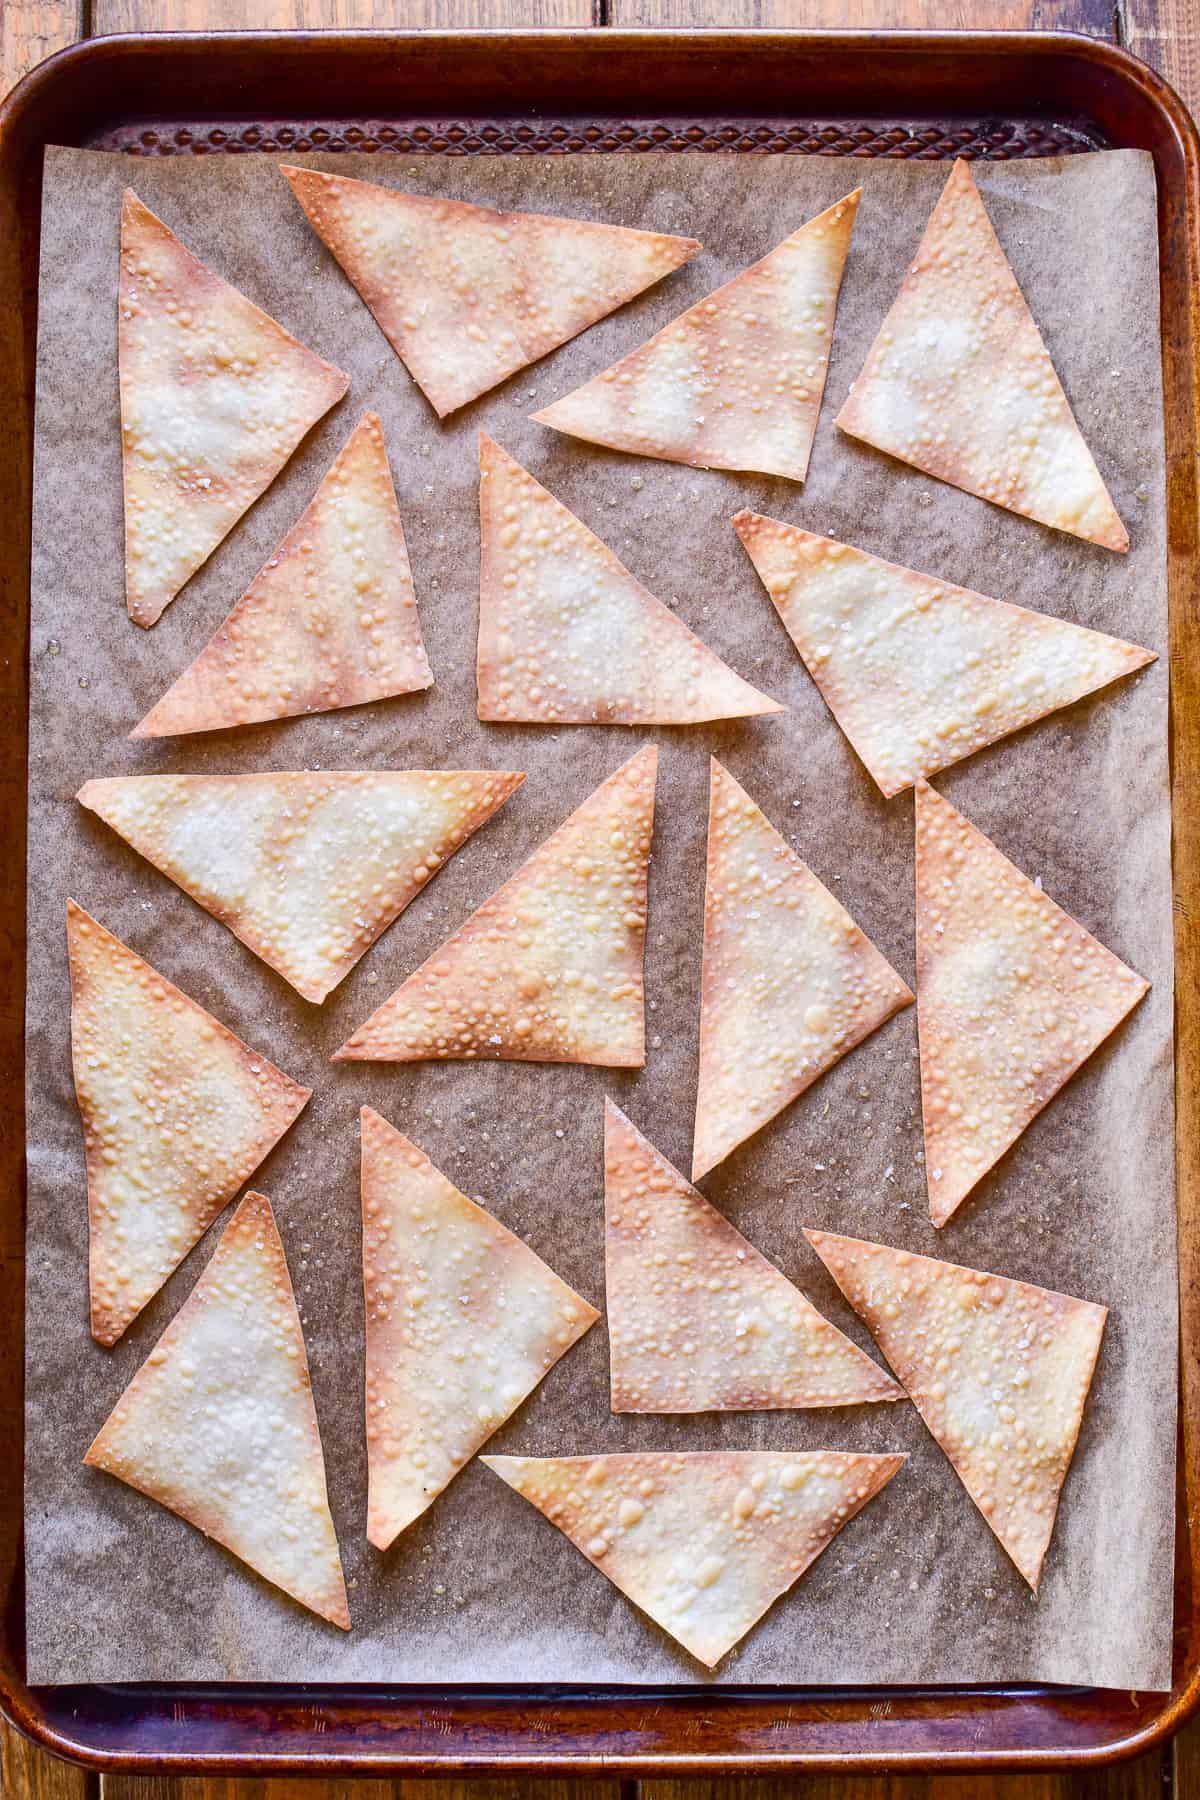 Wonton Chips on a baking sheet lined with parchment paper